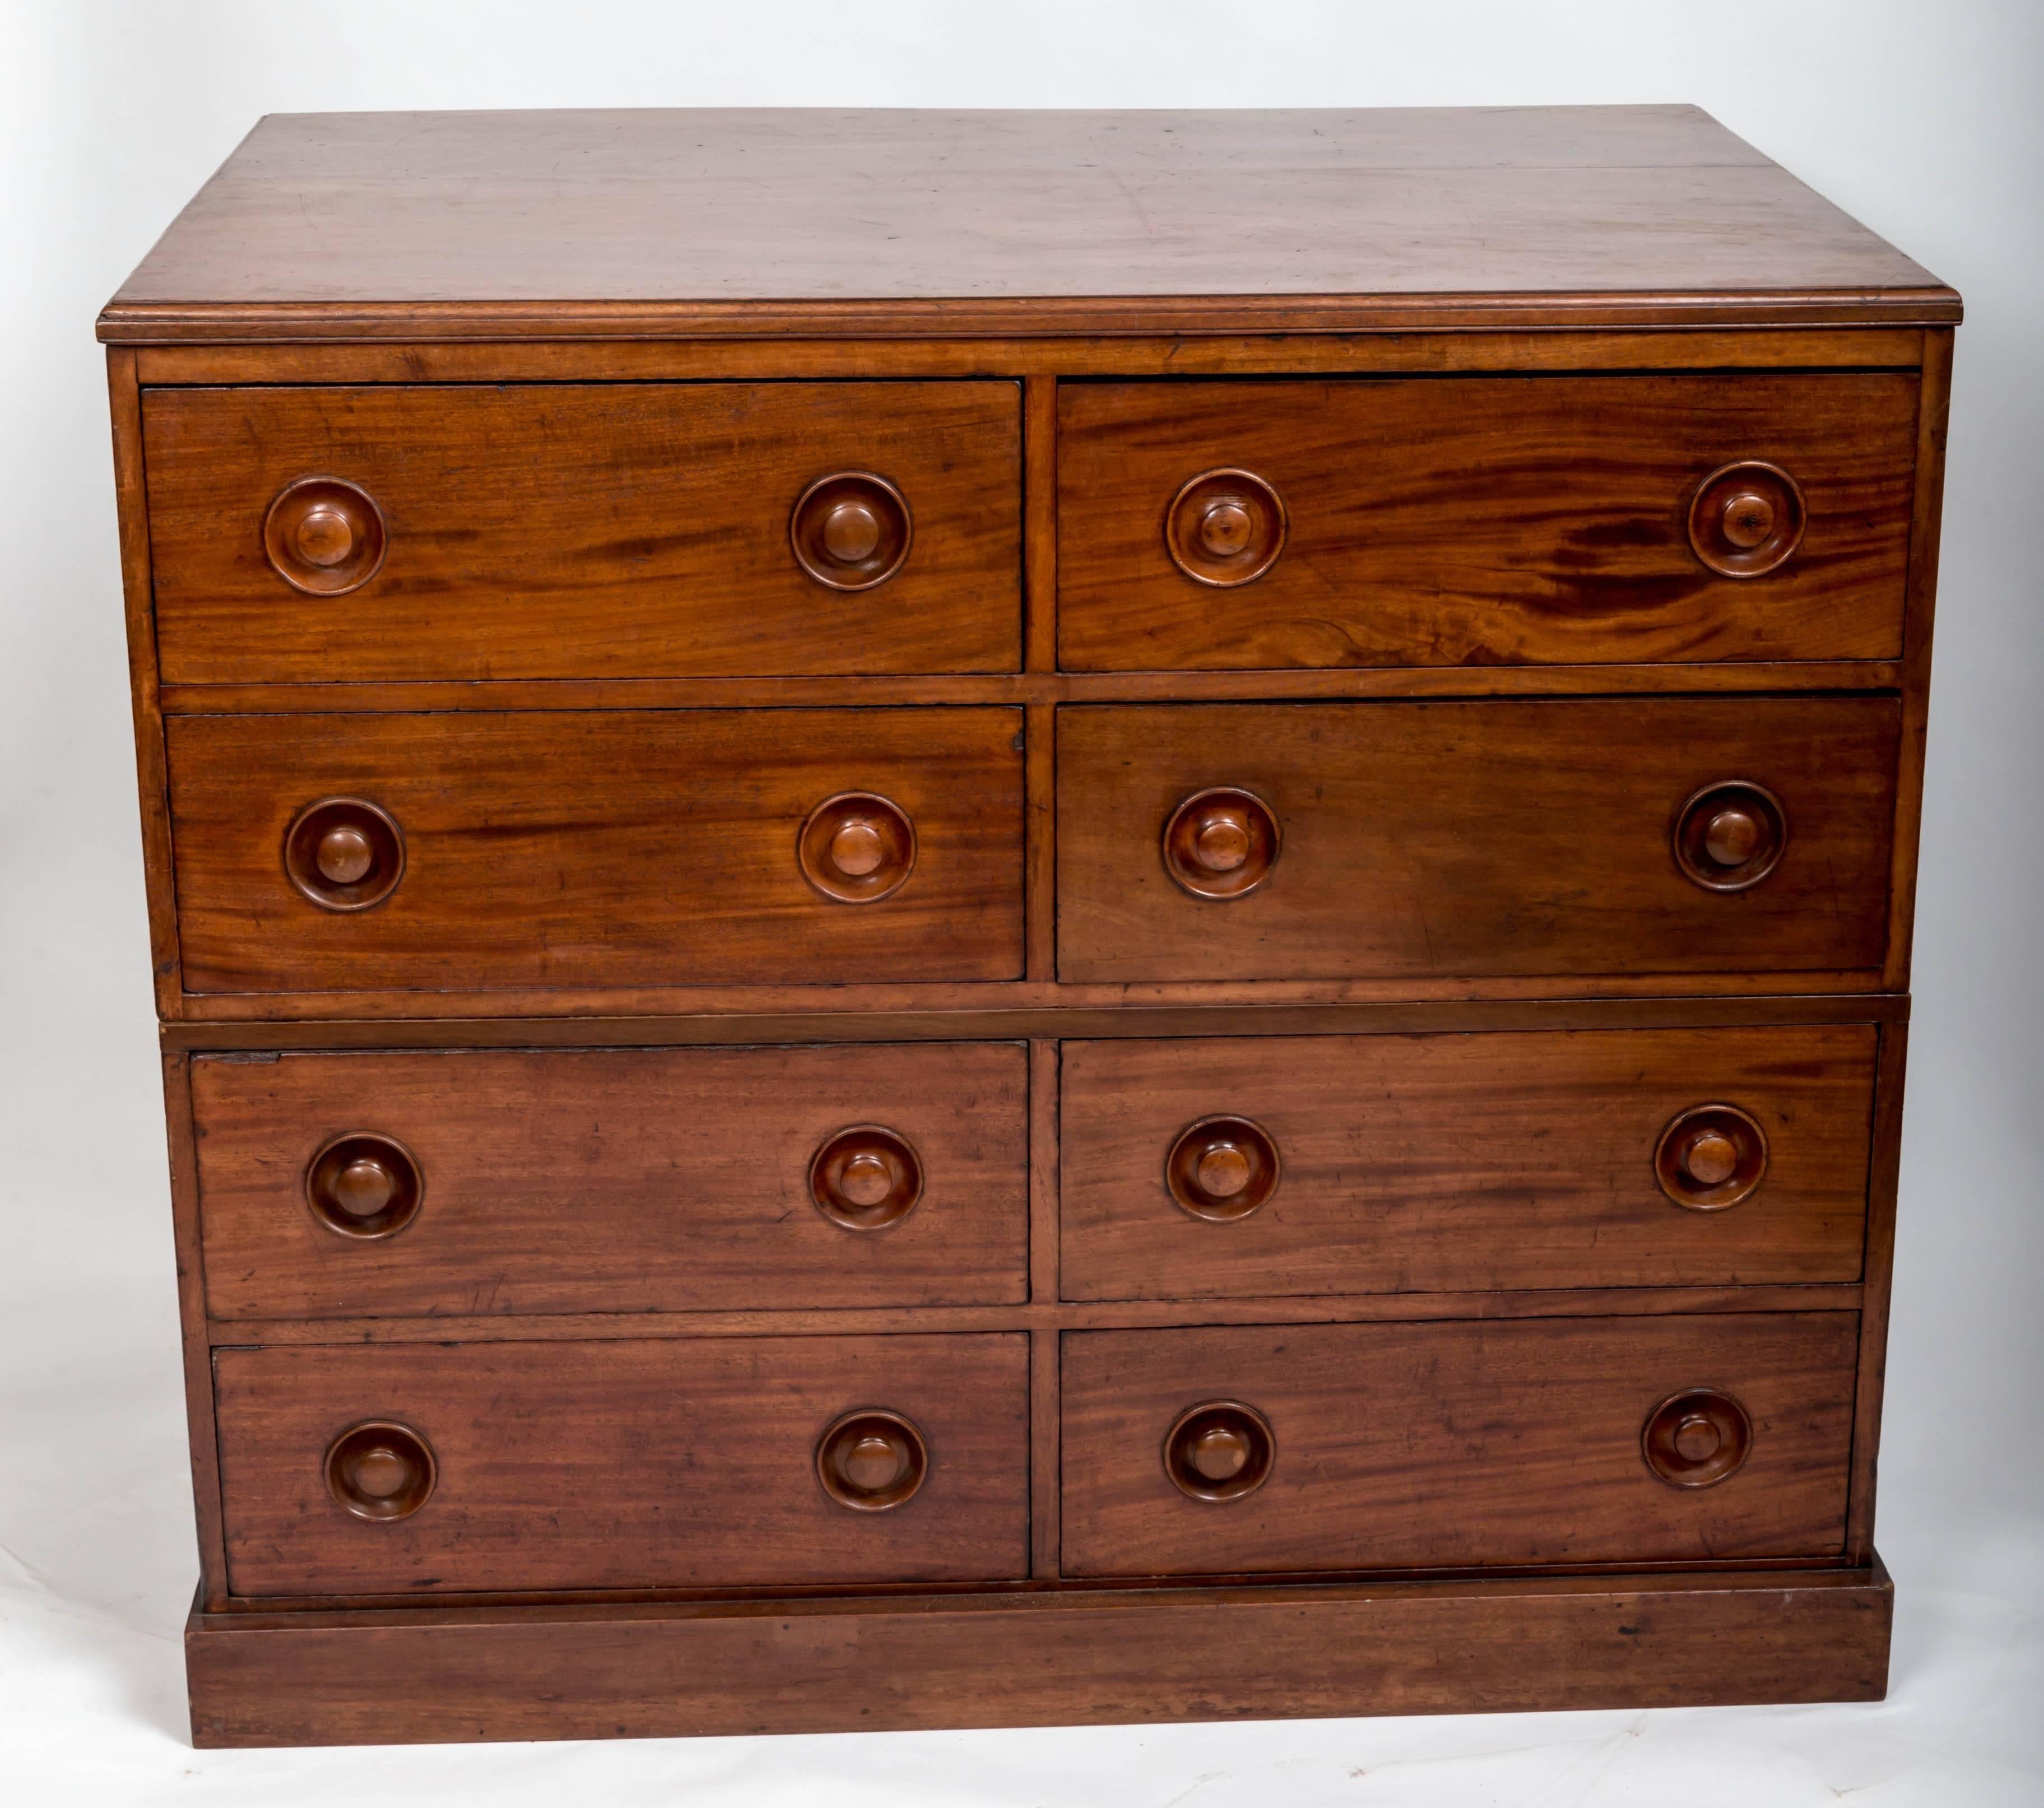 Unusually deep chest, originally used as a milliners cabaret, eight deep drawers on a plinth base. In two sections.